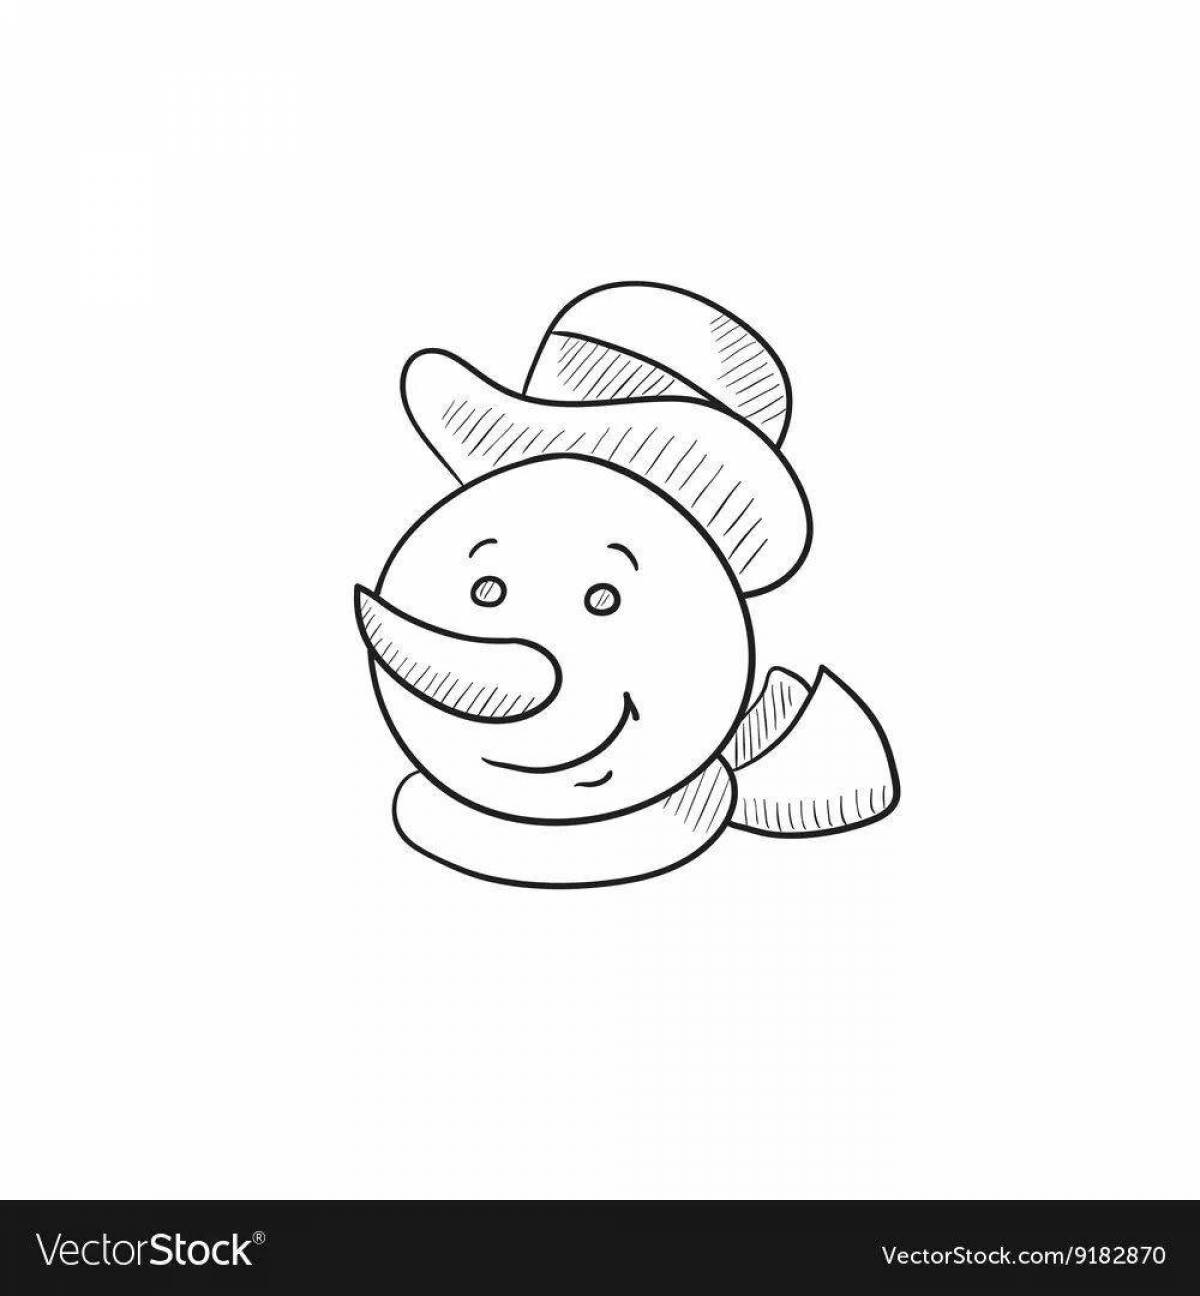 Color-frenzy mask snowman coloring page